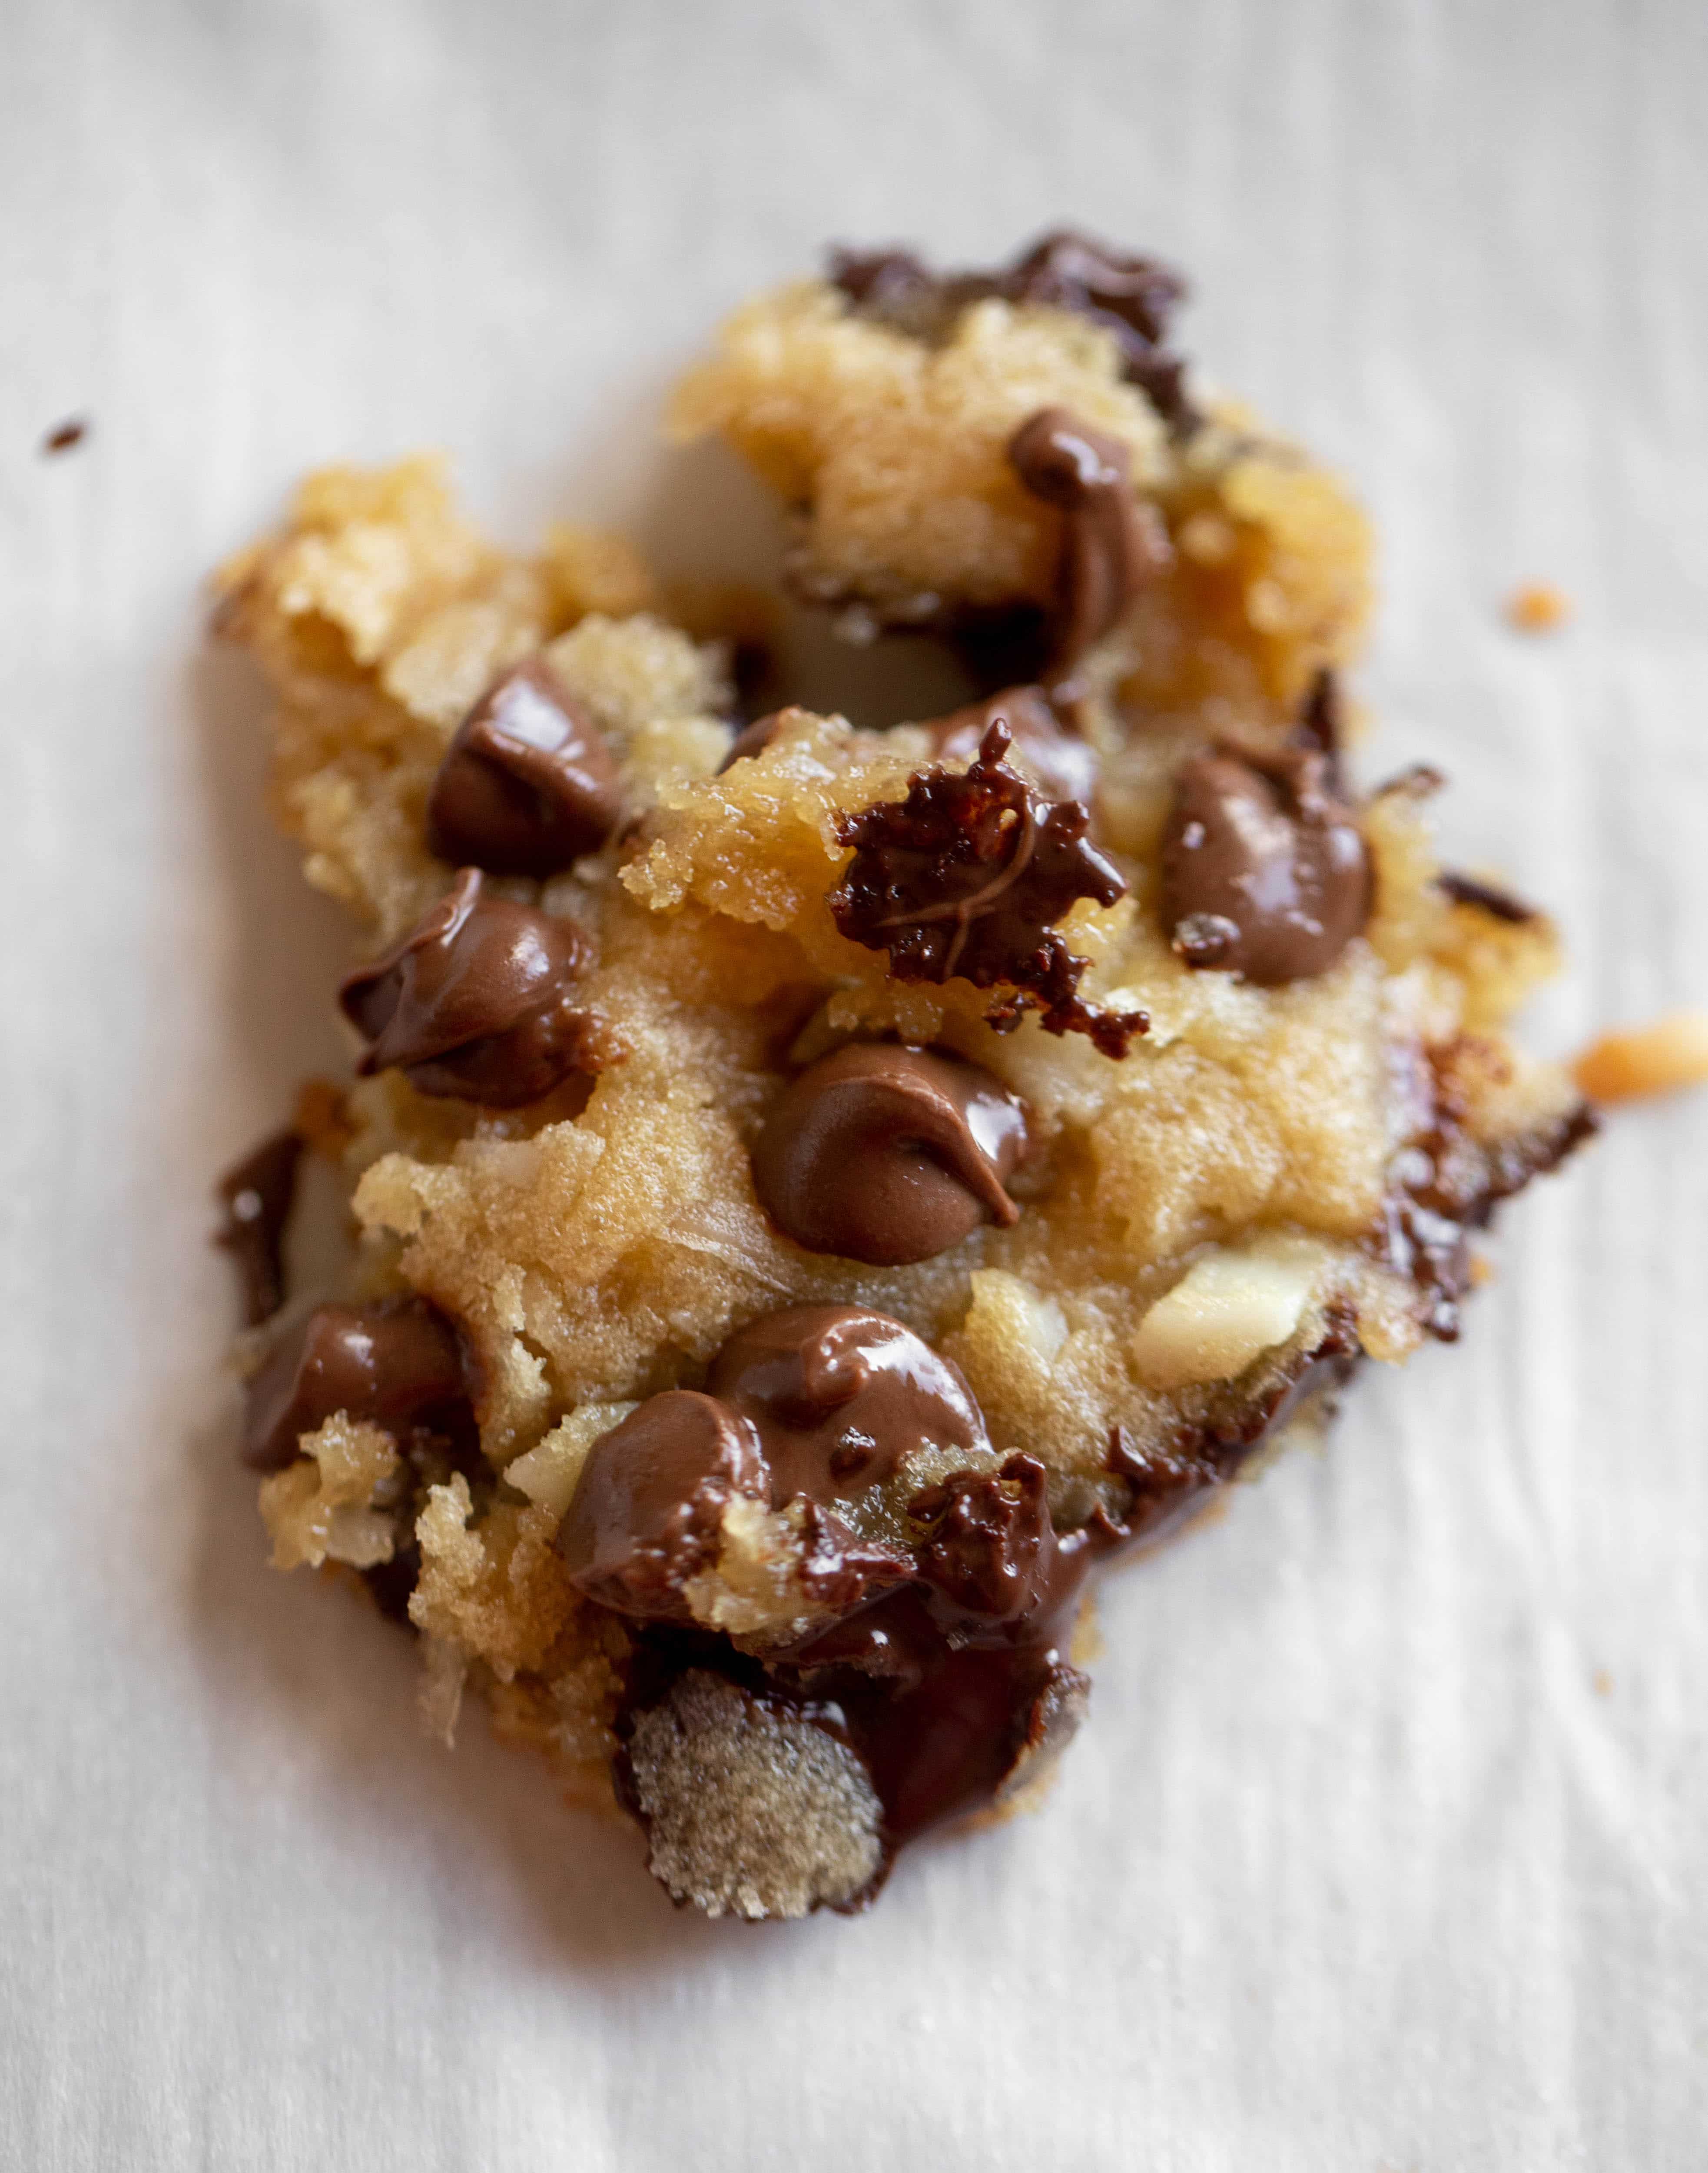 Royal cookies are filled with chocolate chips, shredded coconut and macadamia nuts. These are the perfect copycat to the Nordstrom royal cookie! 